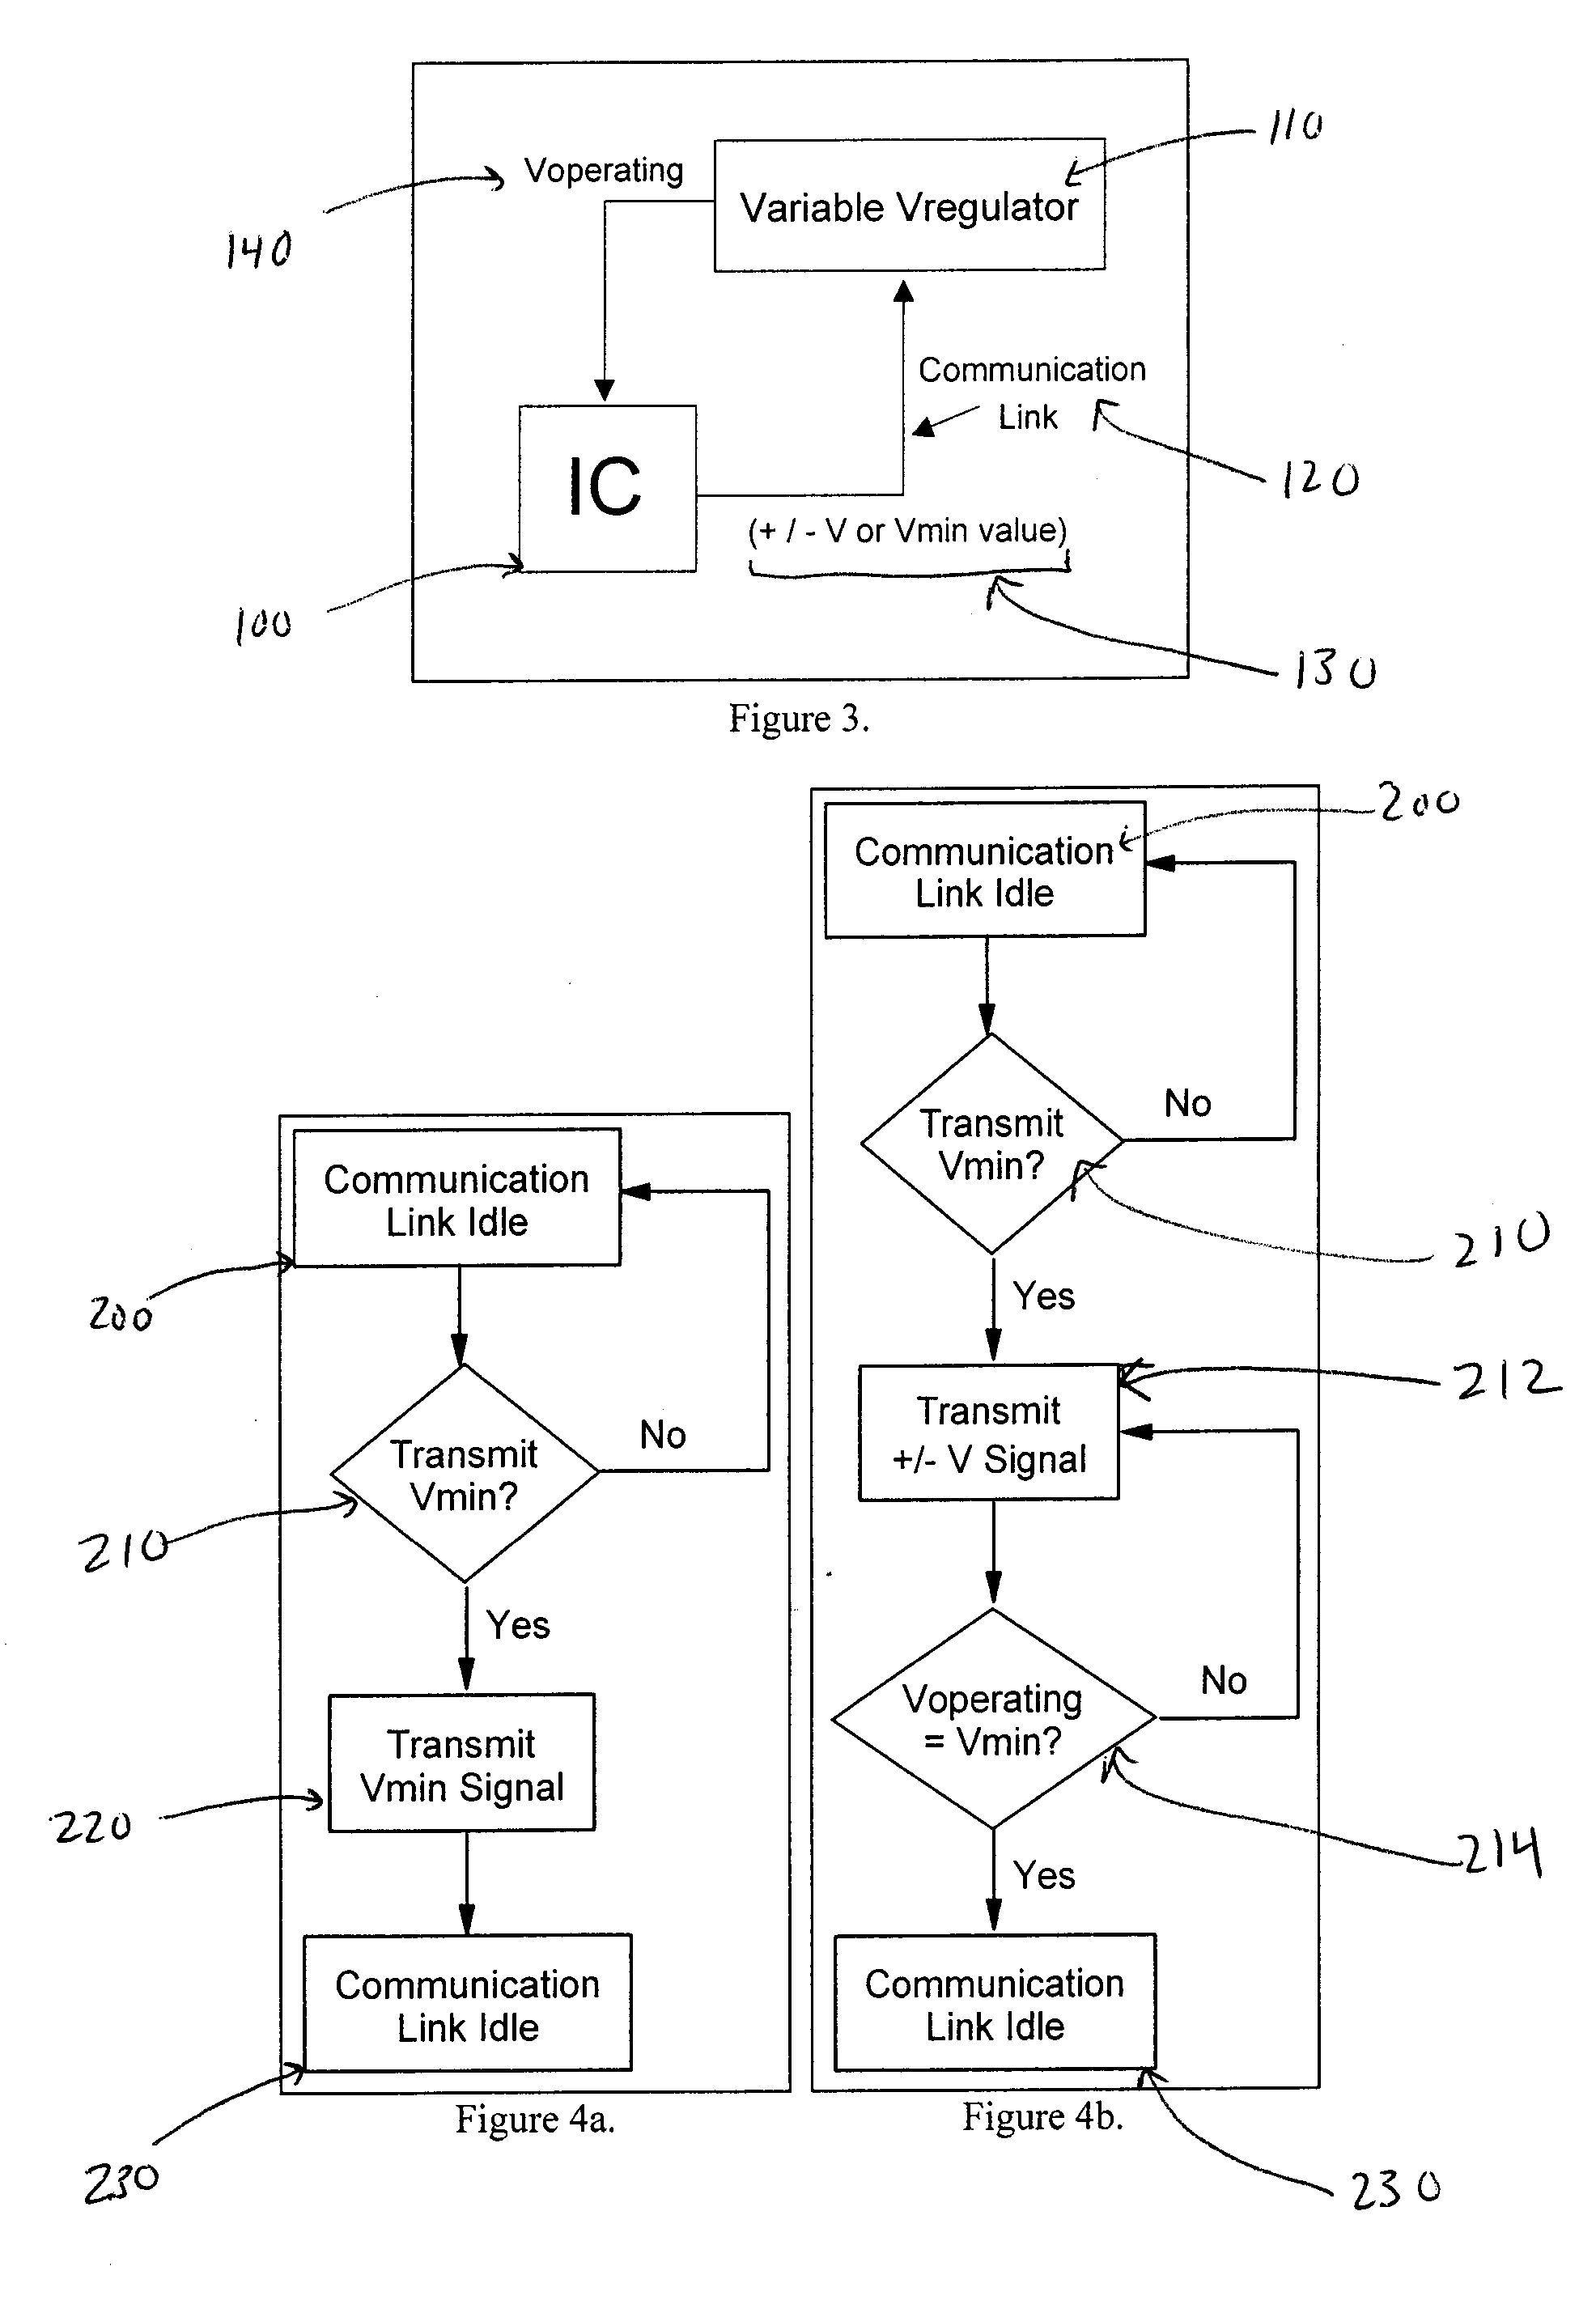 System and method of controlling power consumption in an electronic system